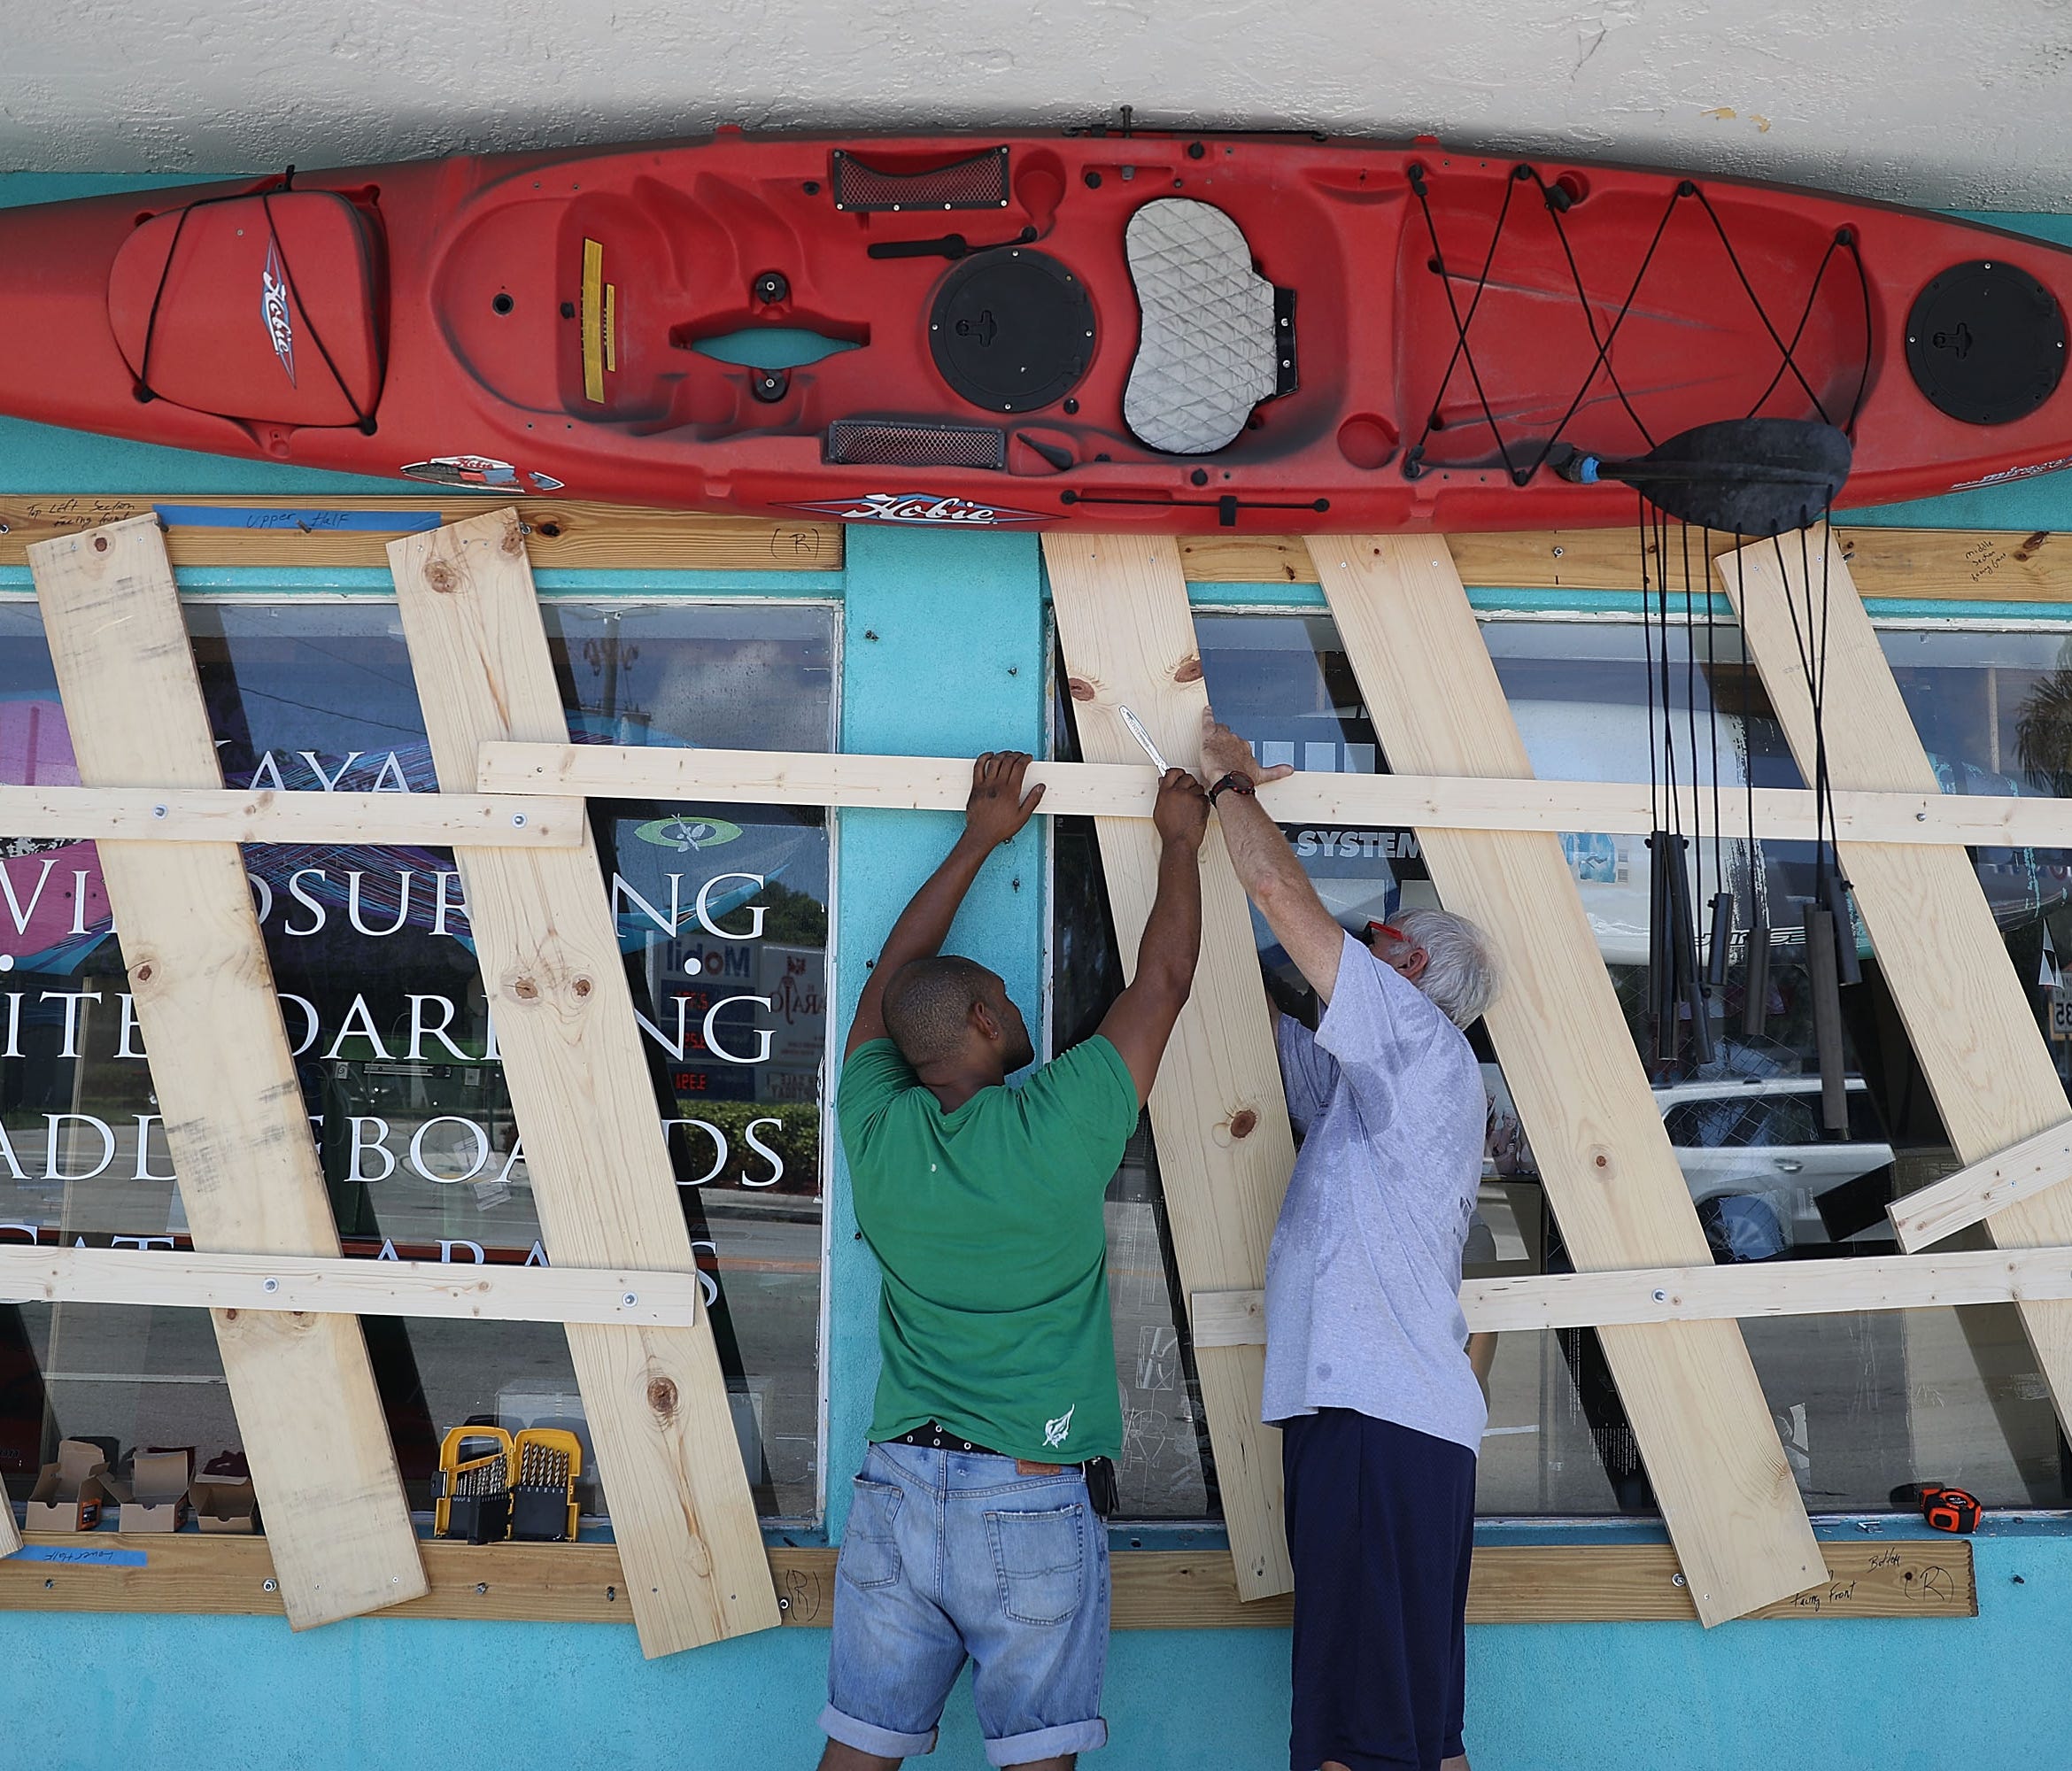 Jim DeSilva, left, and Milton Ibanez put window protection on their business, Sandy Point, as they prepare for Hurricane Irma in Miami.